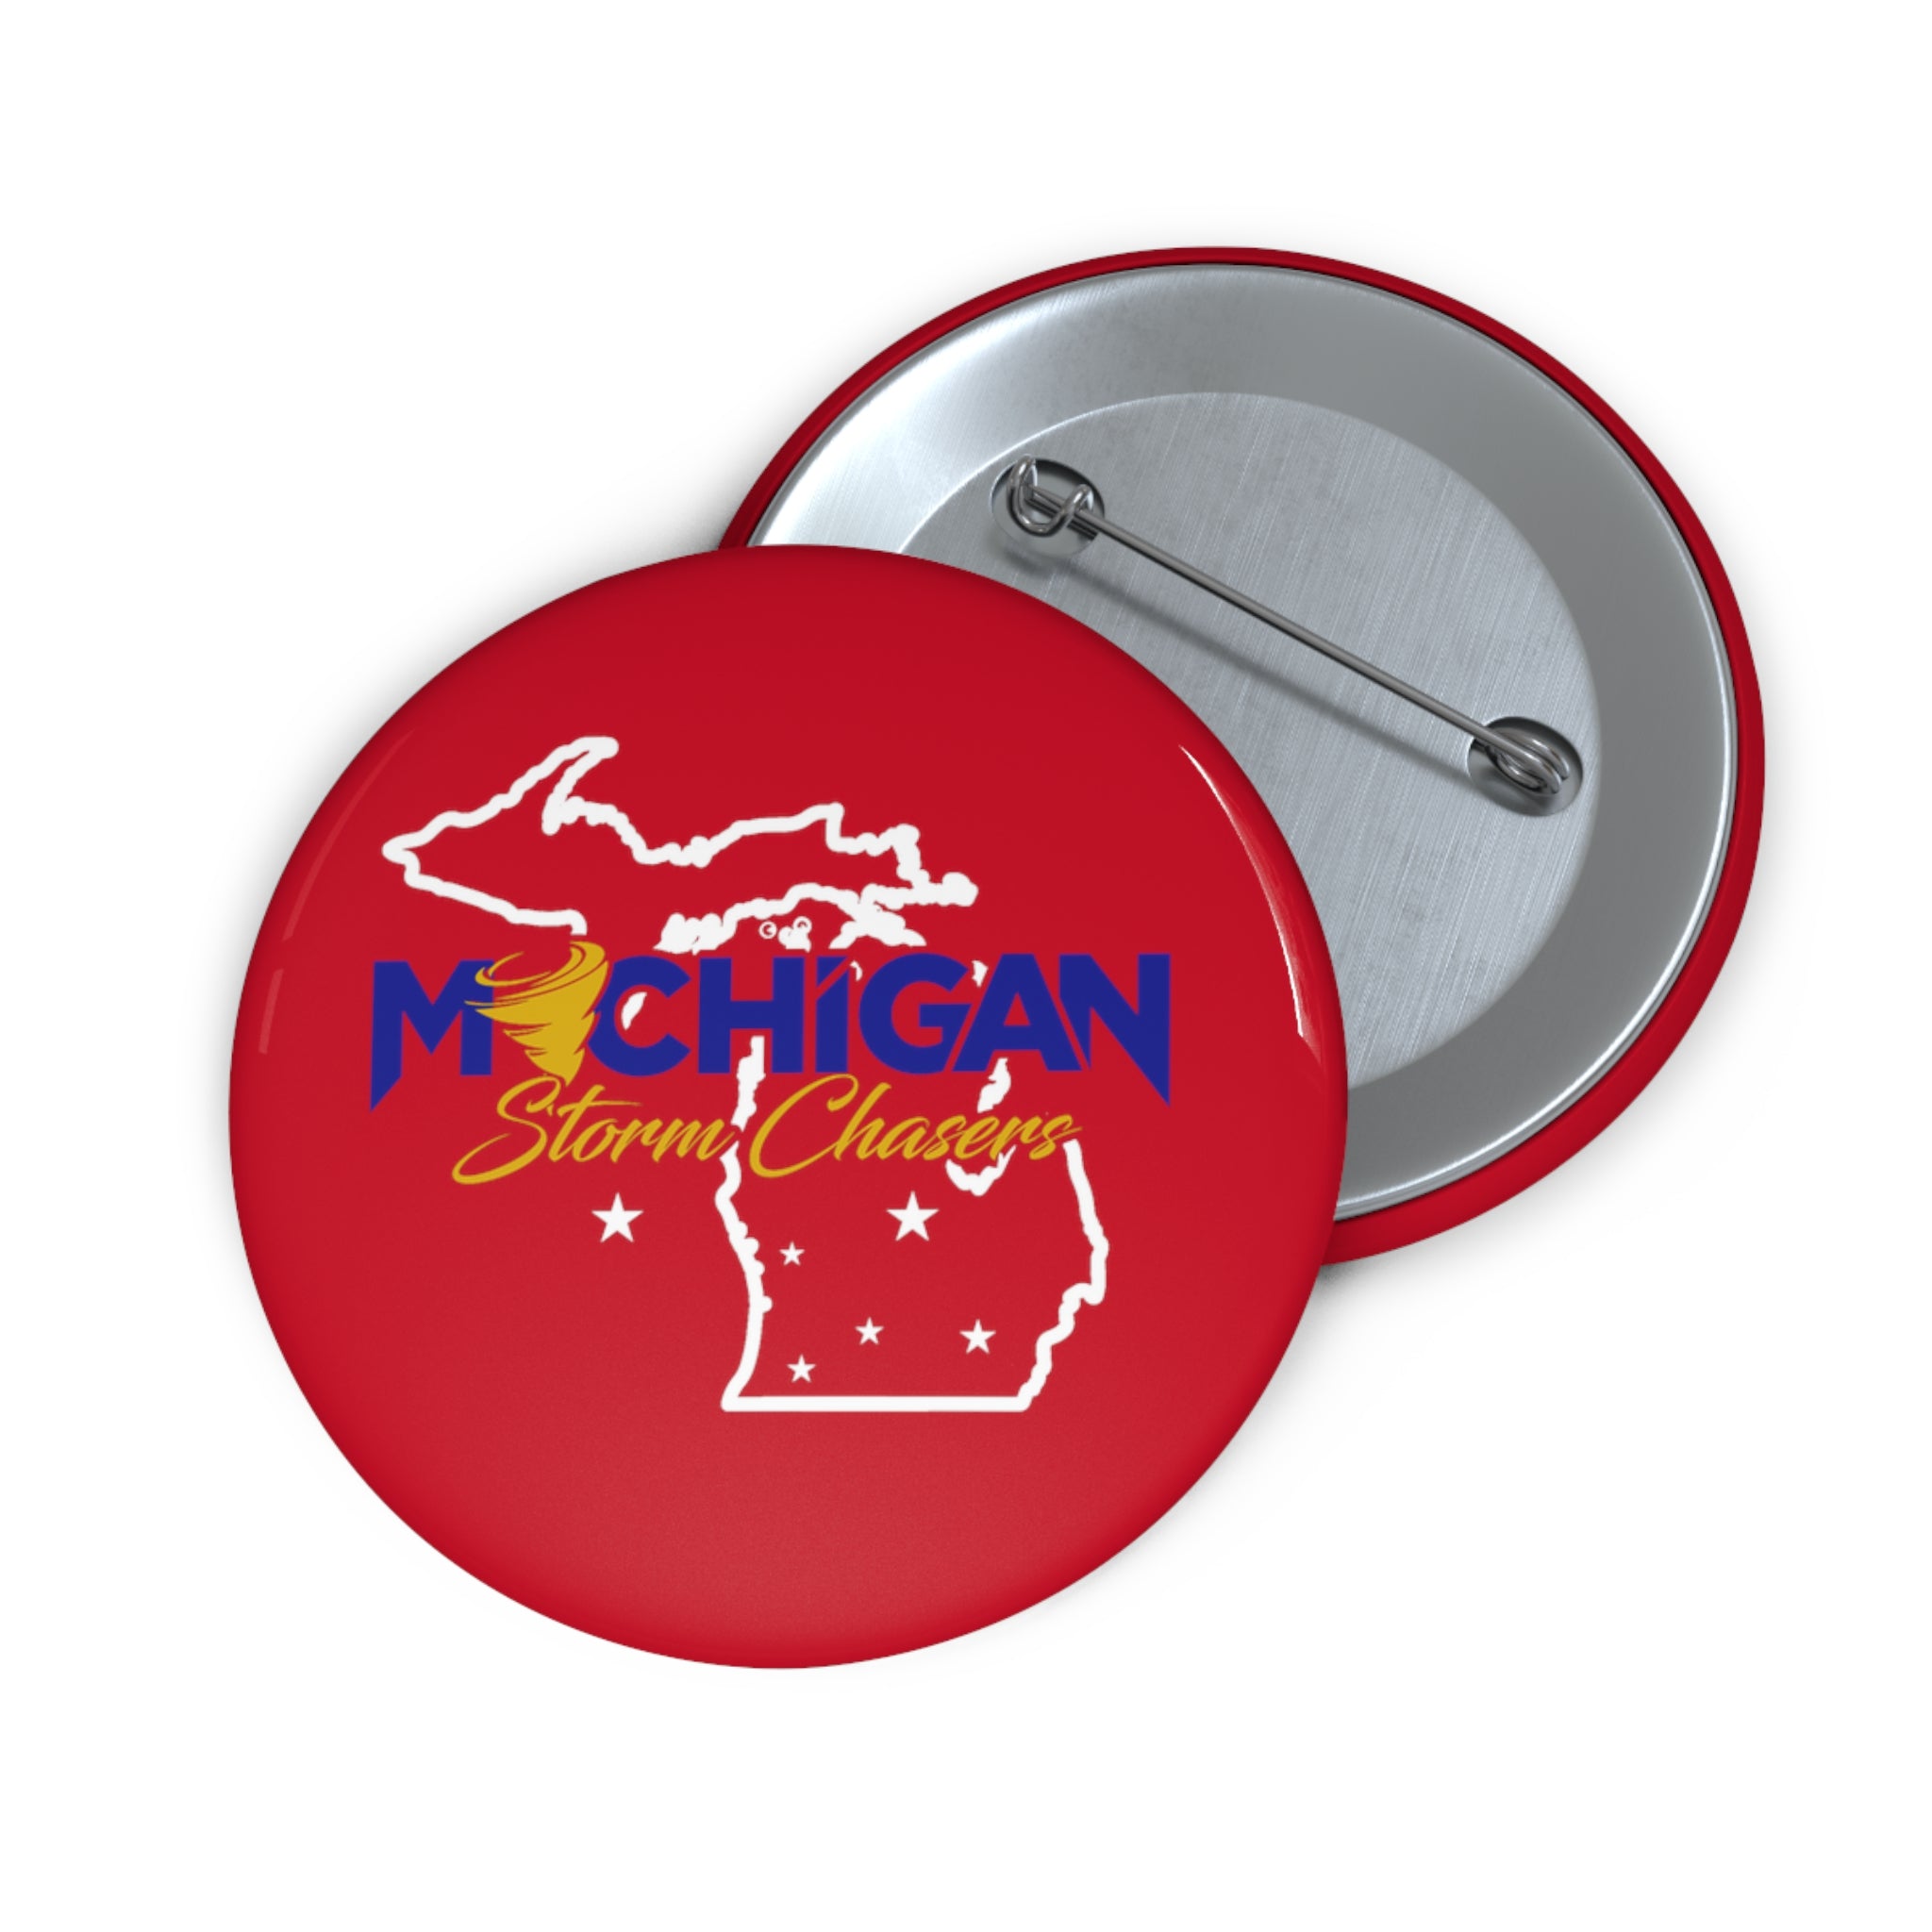 Michigan Storm Chasers Pin Buttons 